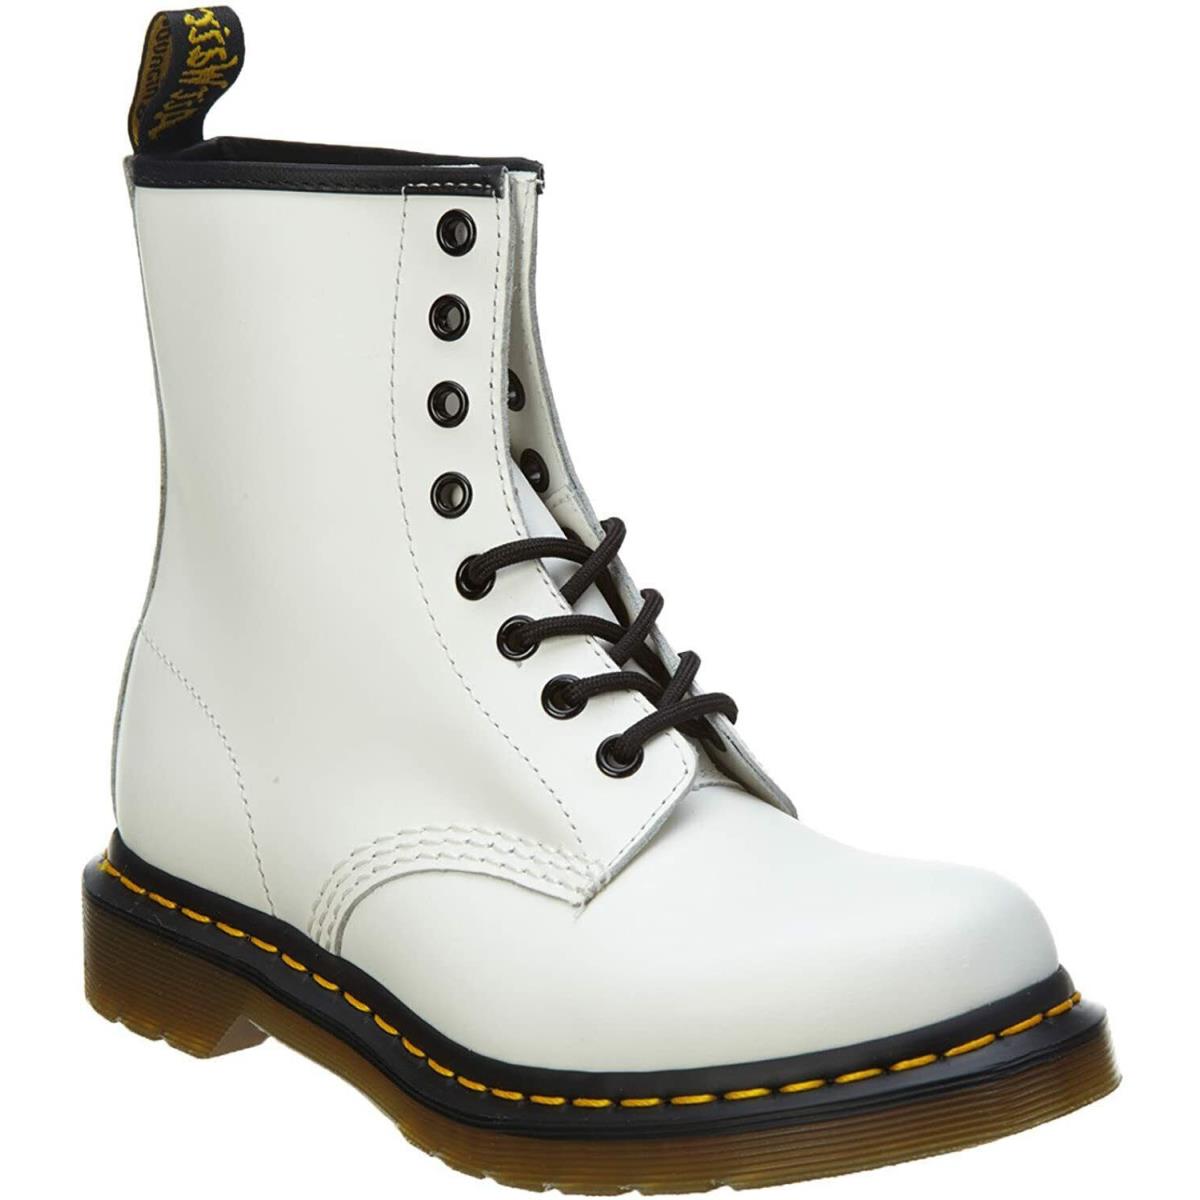 so Fine Skepticism Women`s Shoes Dr. Martens 1460 8 Eye Leather Boots 11821100 White Smooth |  017863454659 - Dr. Martens shoes - White | SporTipTop